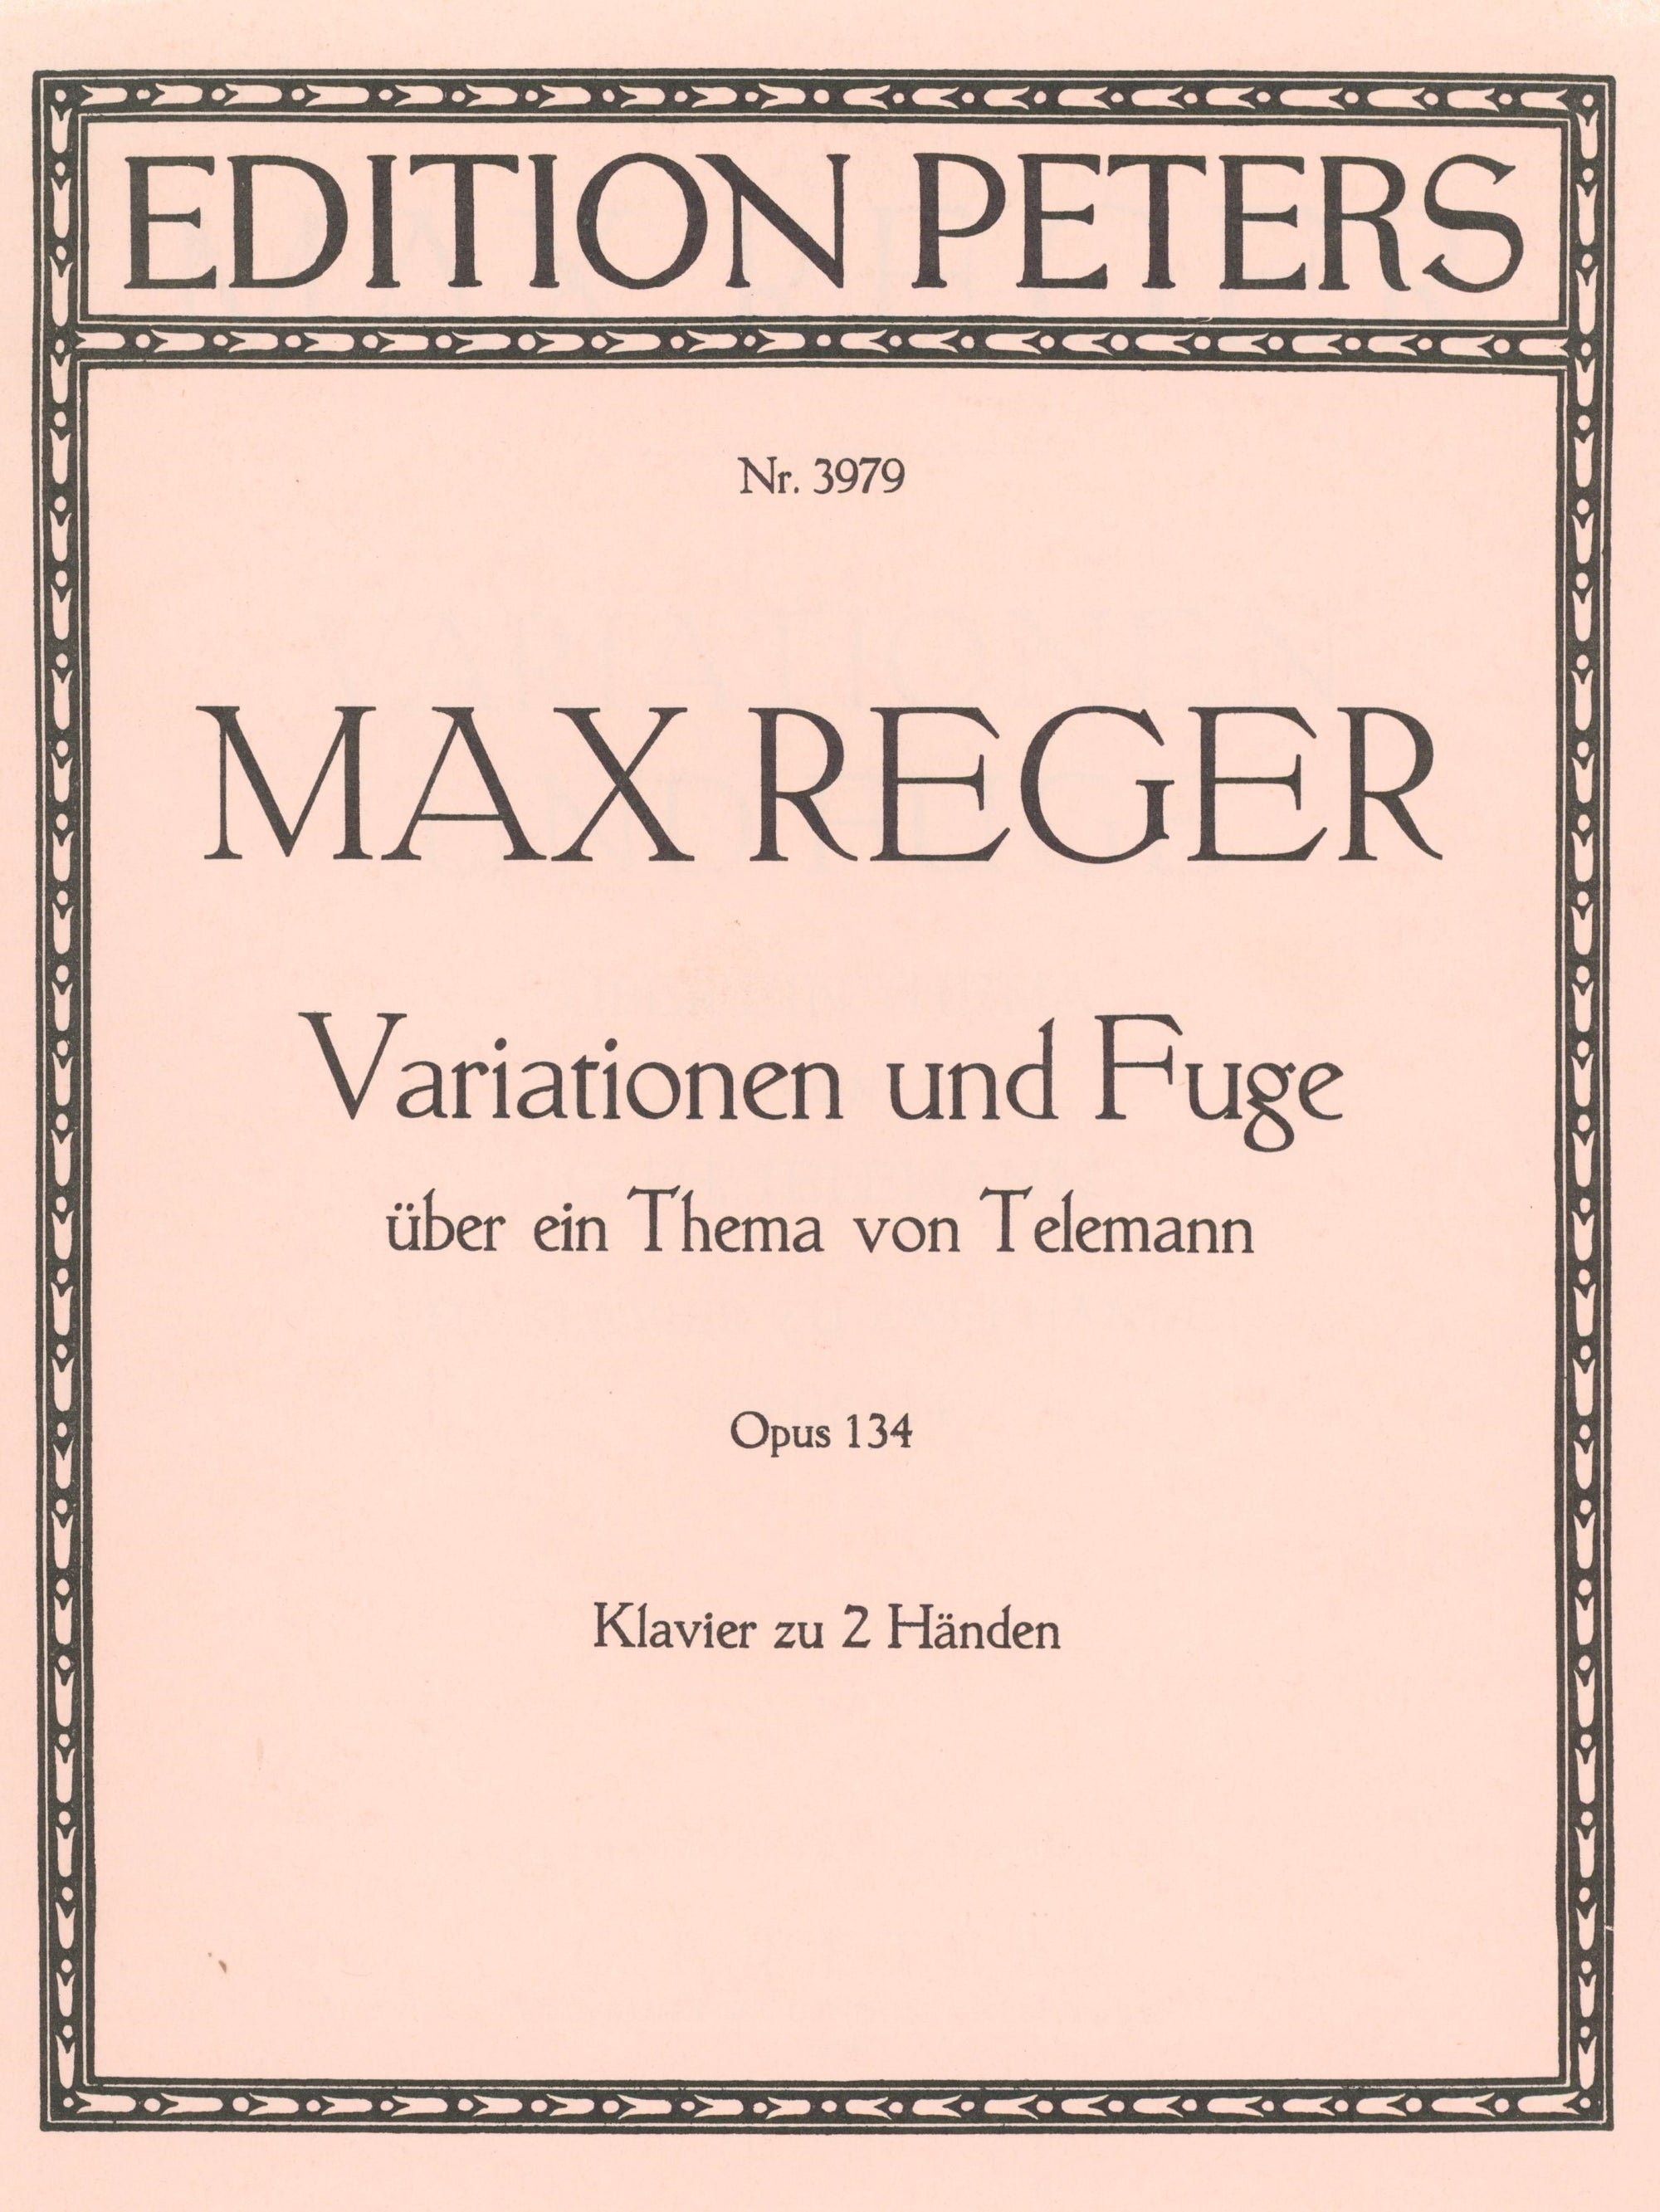 Reger: Variations and Fugue on a Theme by Telemann, Op. 134